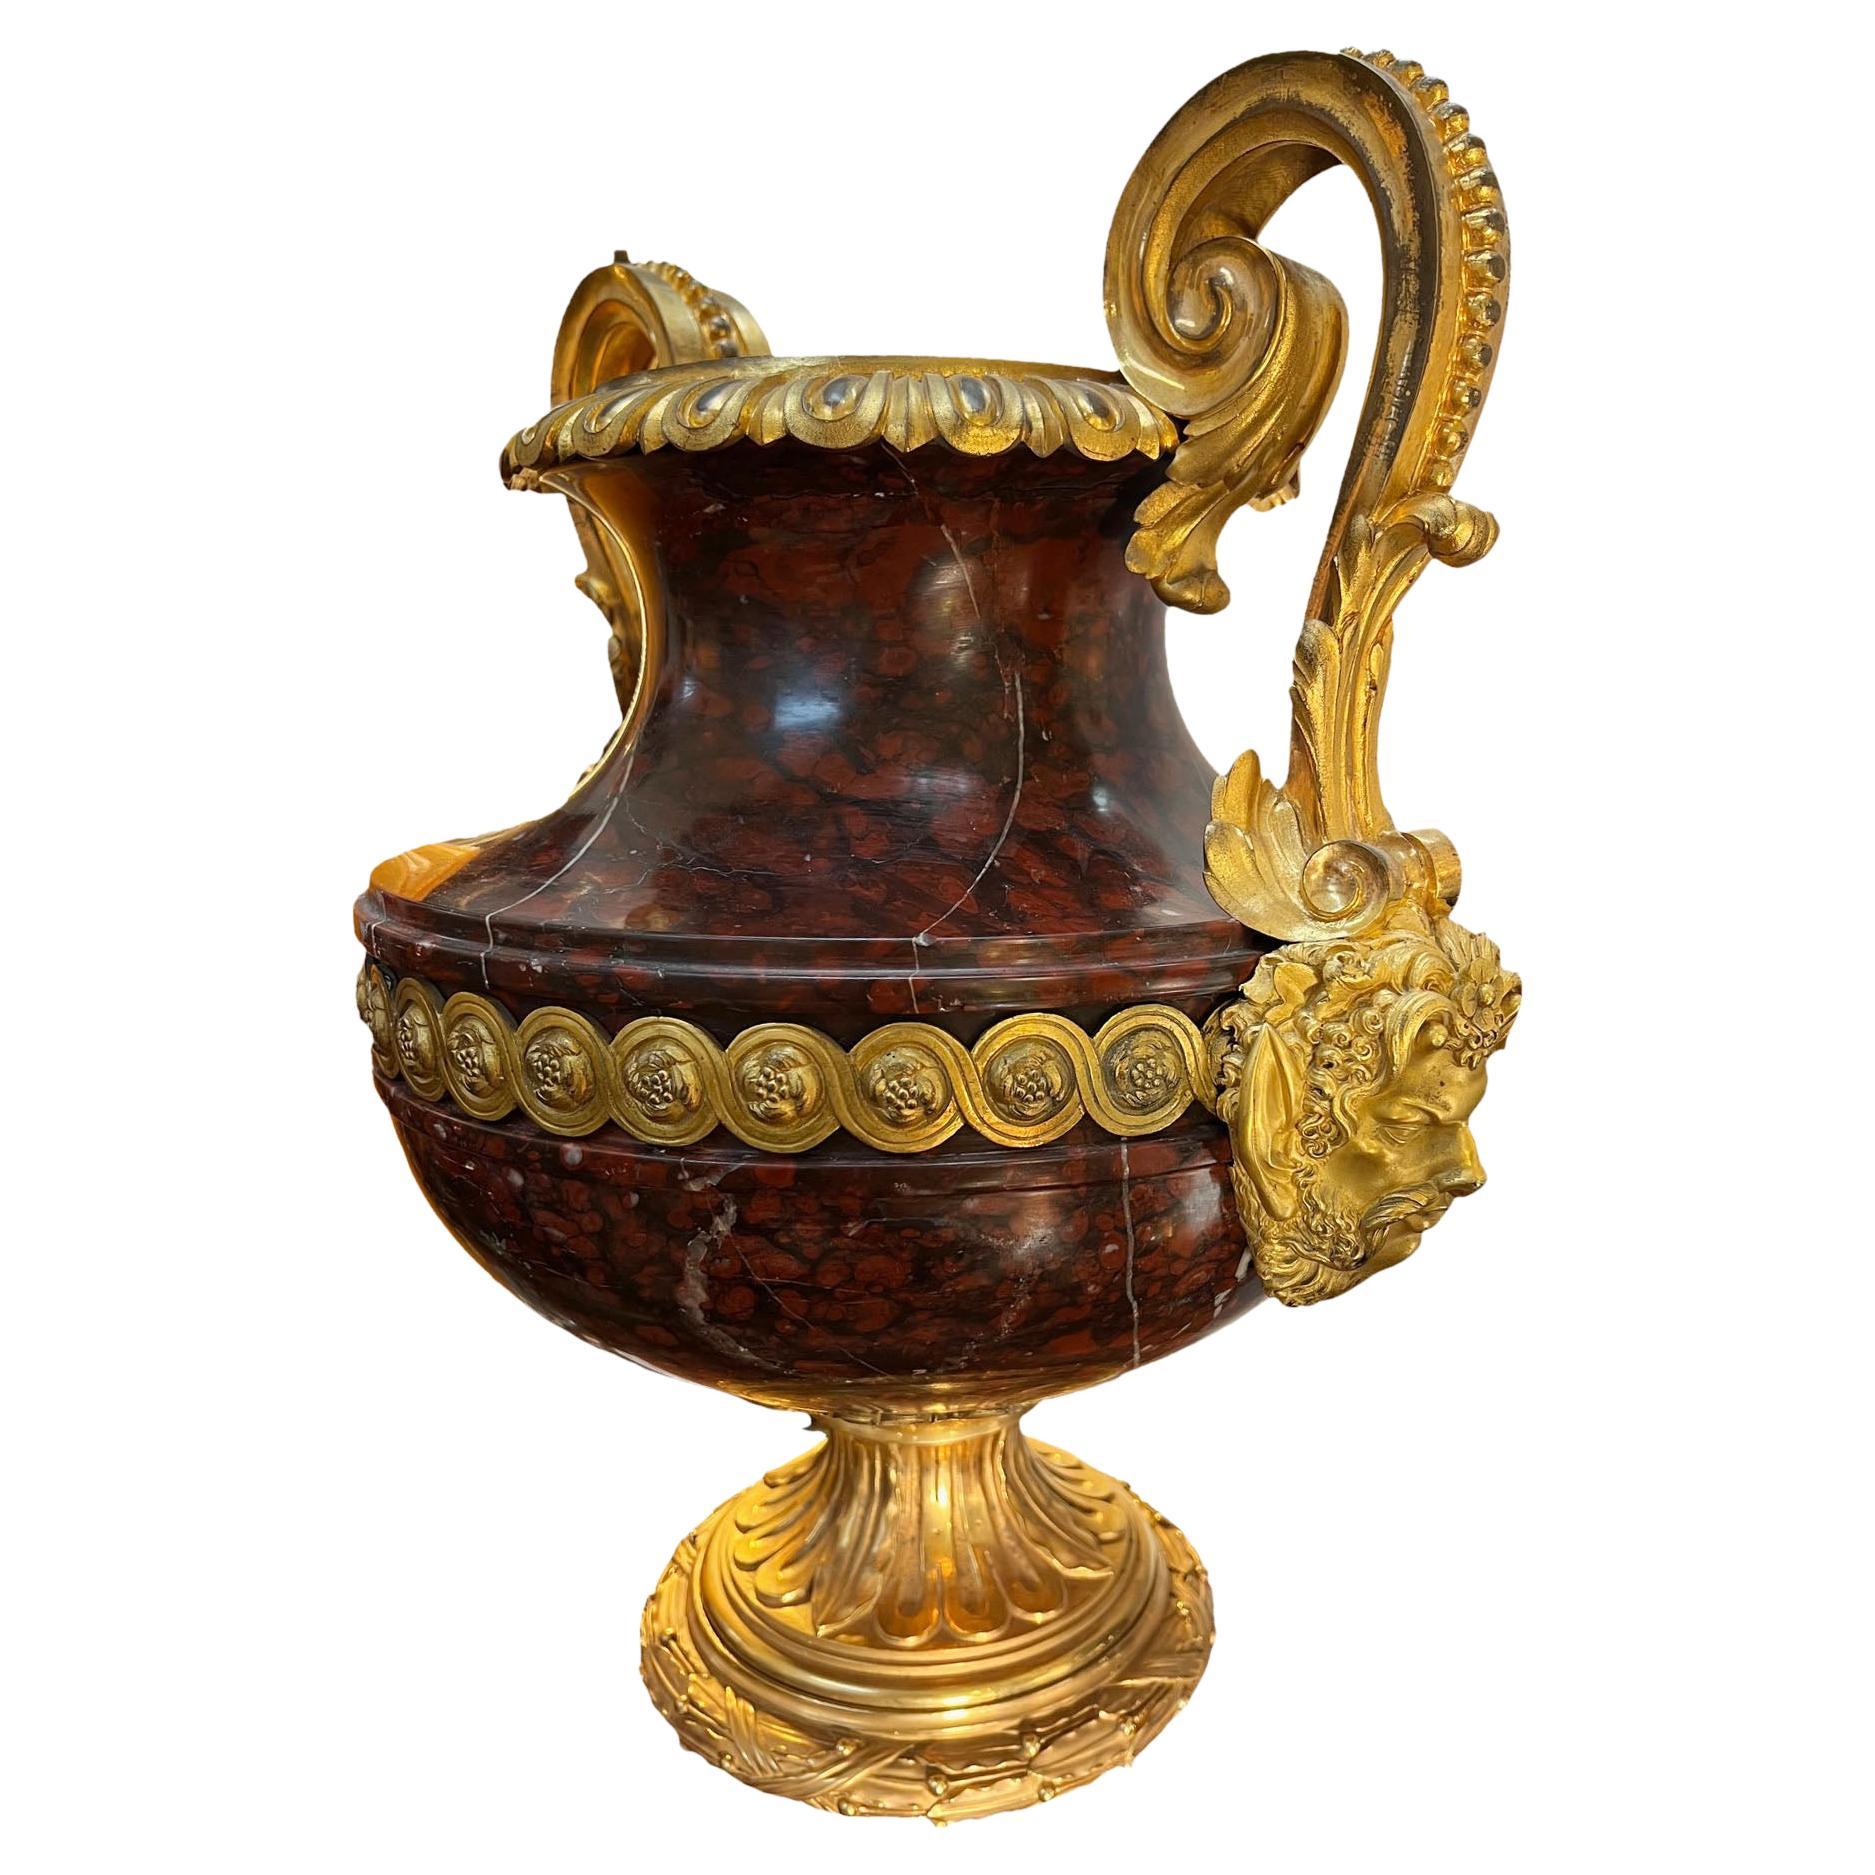 Large marble urn with curved two handled arms and well detailed bronze dore faces. Mark different from base marble. 19th century, Italy. Urn only is nineteen and three quarters inches high.